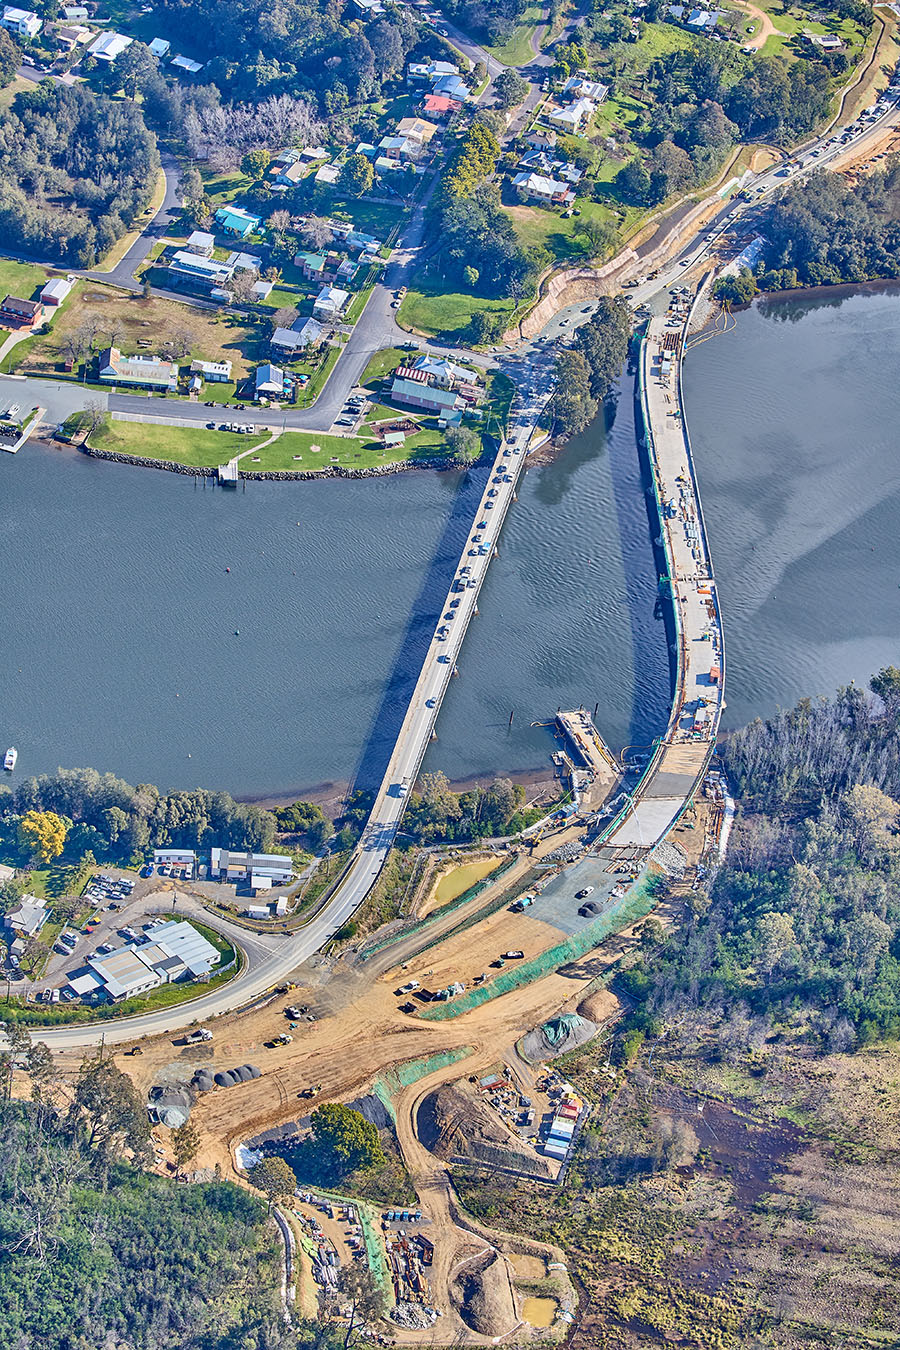 There is still lots of earthworks needed to connect the new bridge to the Kings Highway